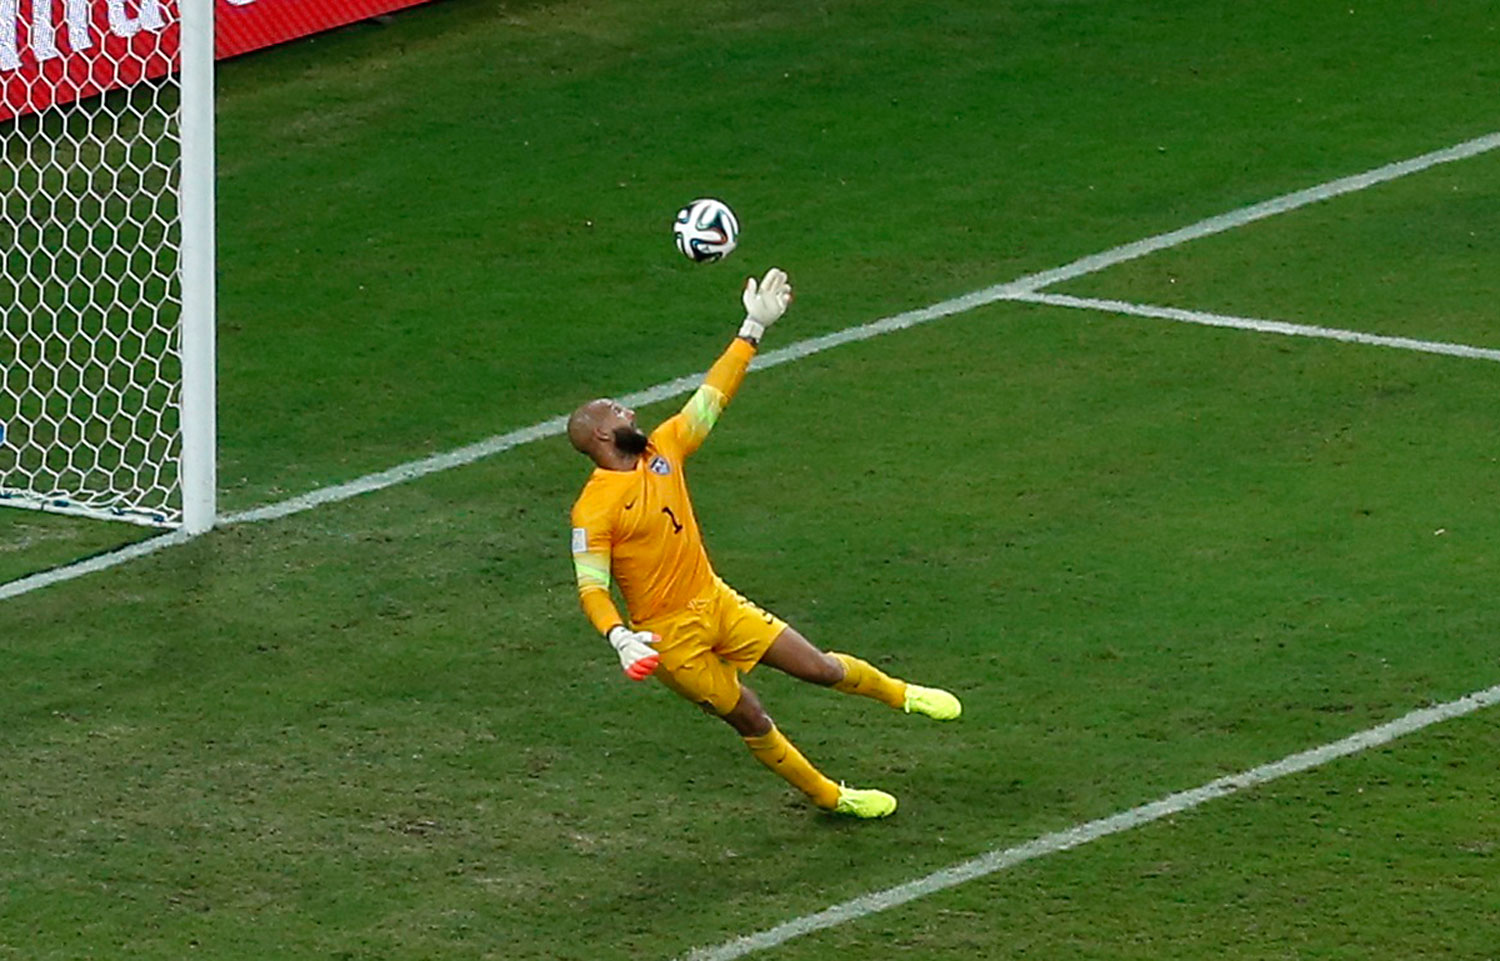 Tim Howard of the U.S. saves a shot by Portugal's Eder during their 2014 World Cup G soccer match at the Amazonia arena in Manaus